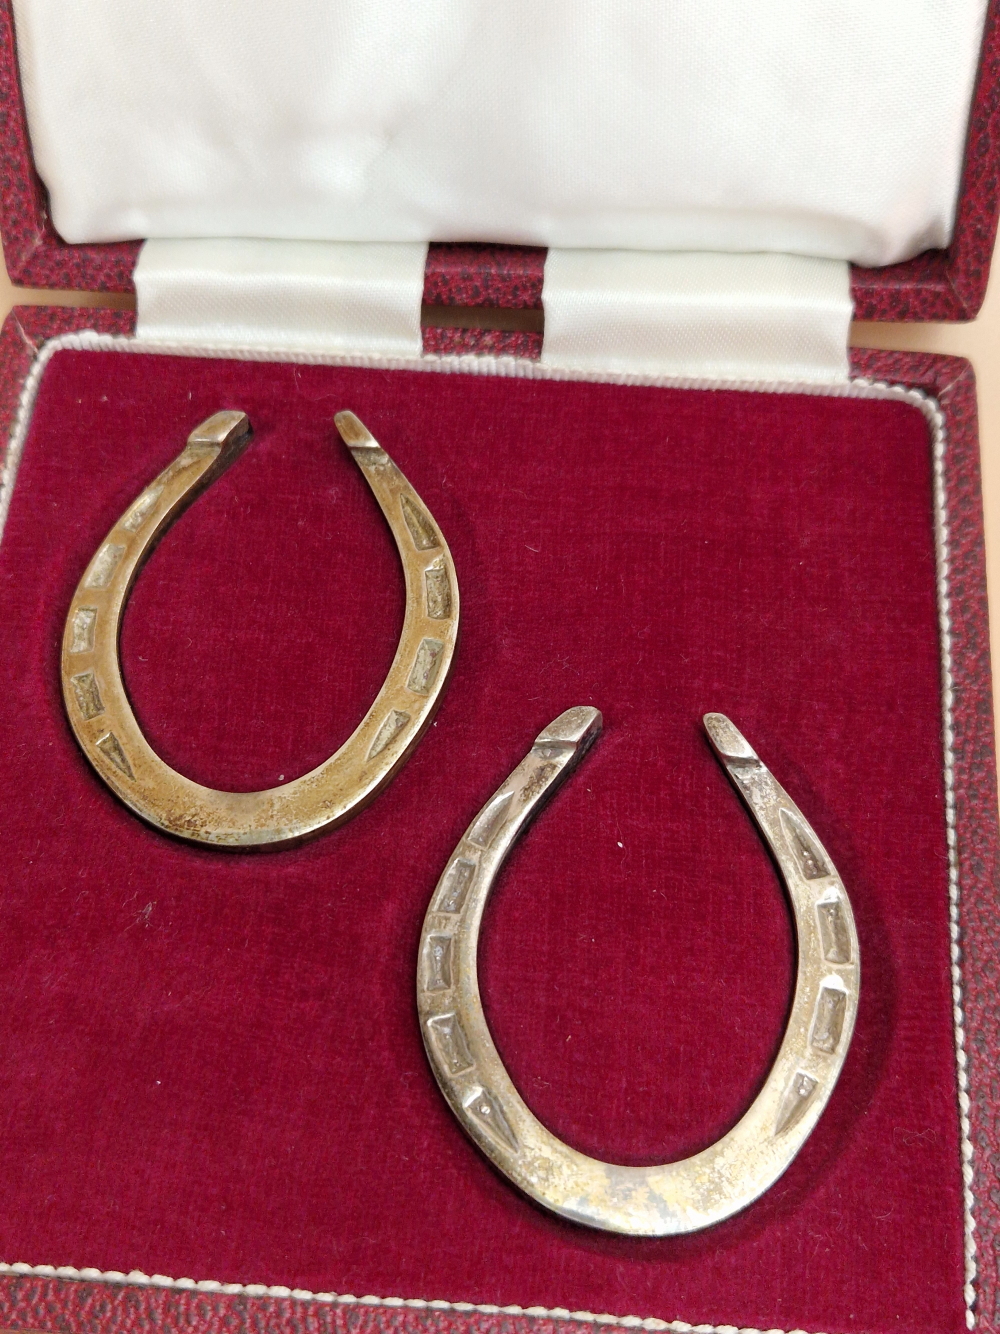 A CASED PAIR OF MINIATURE SILVER HORSESHOES BY FRANCIS HOWARD, SHEFFIELD 1978, 50Gms. - Image 2 of 4